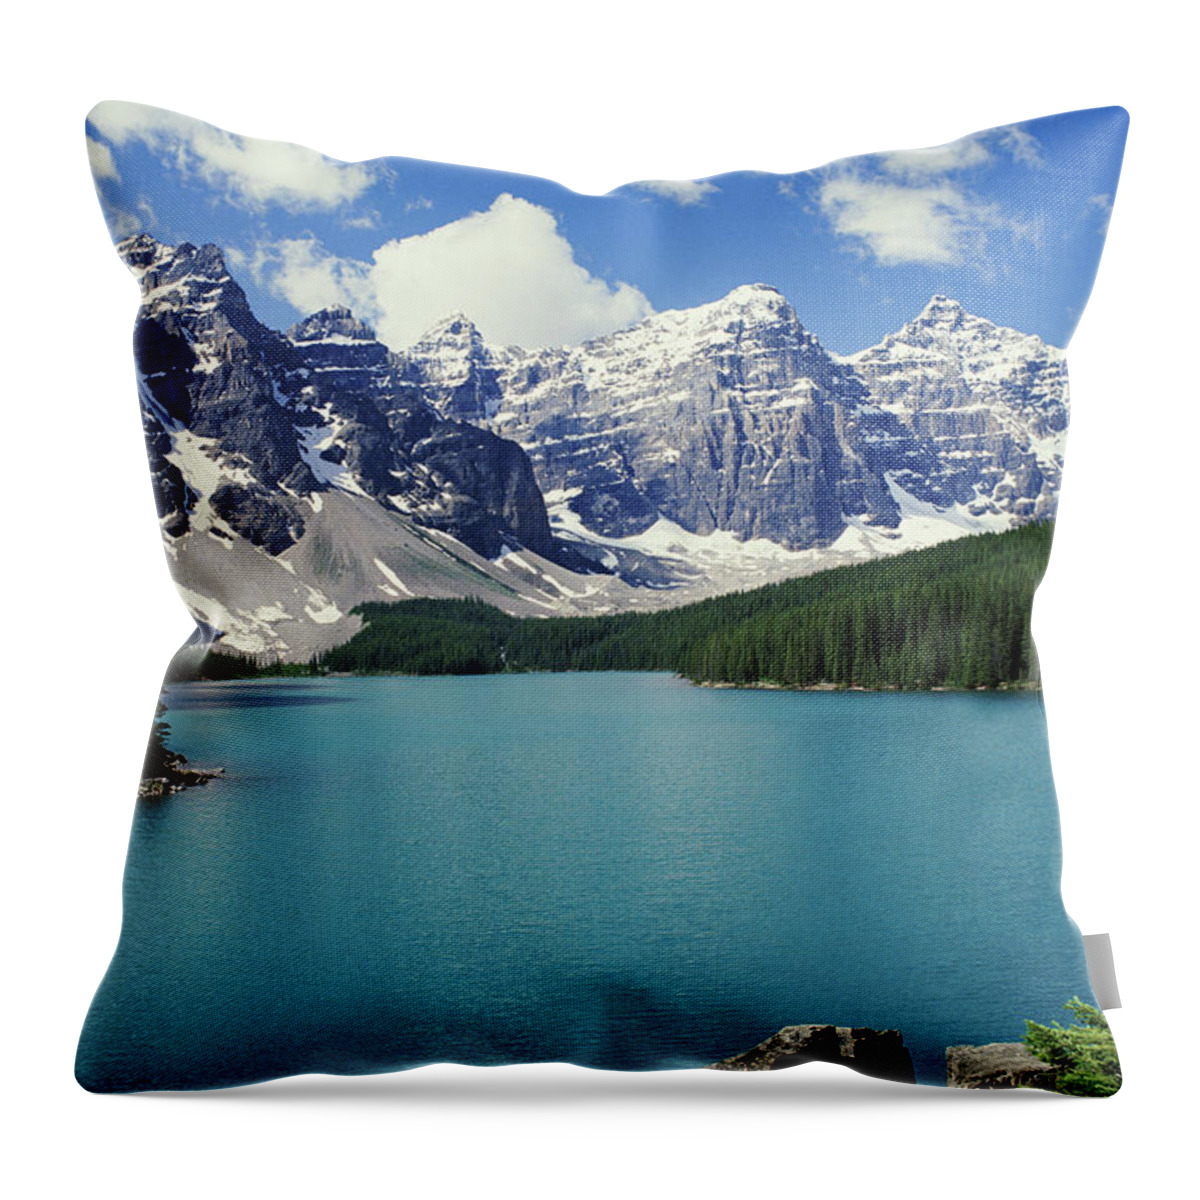 Scenics Throw Pillow featuring the photograph Canada,alberta,banff National Park by Ascent/pks Media Inc.